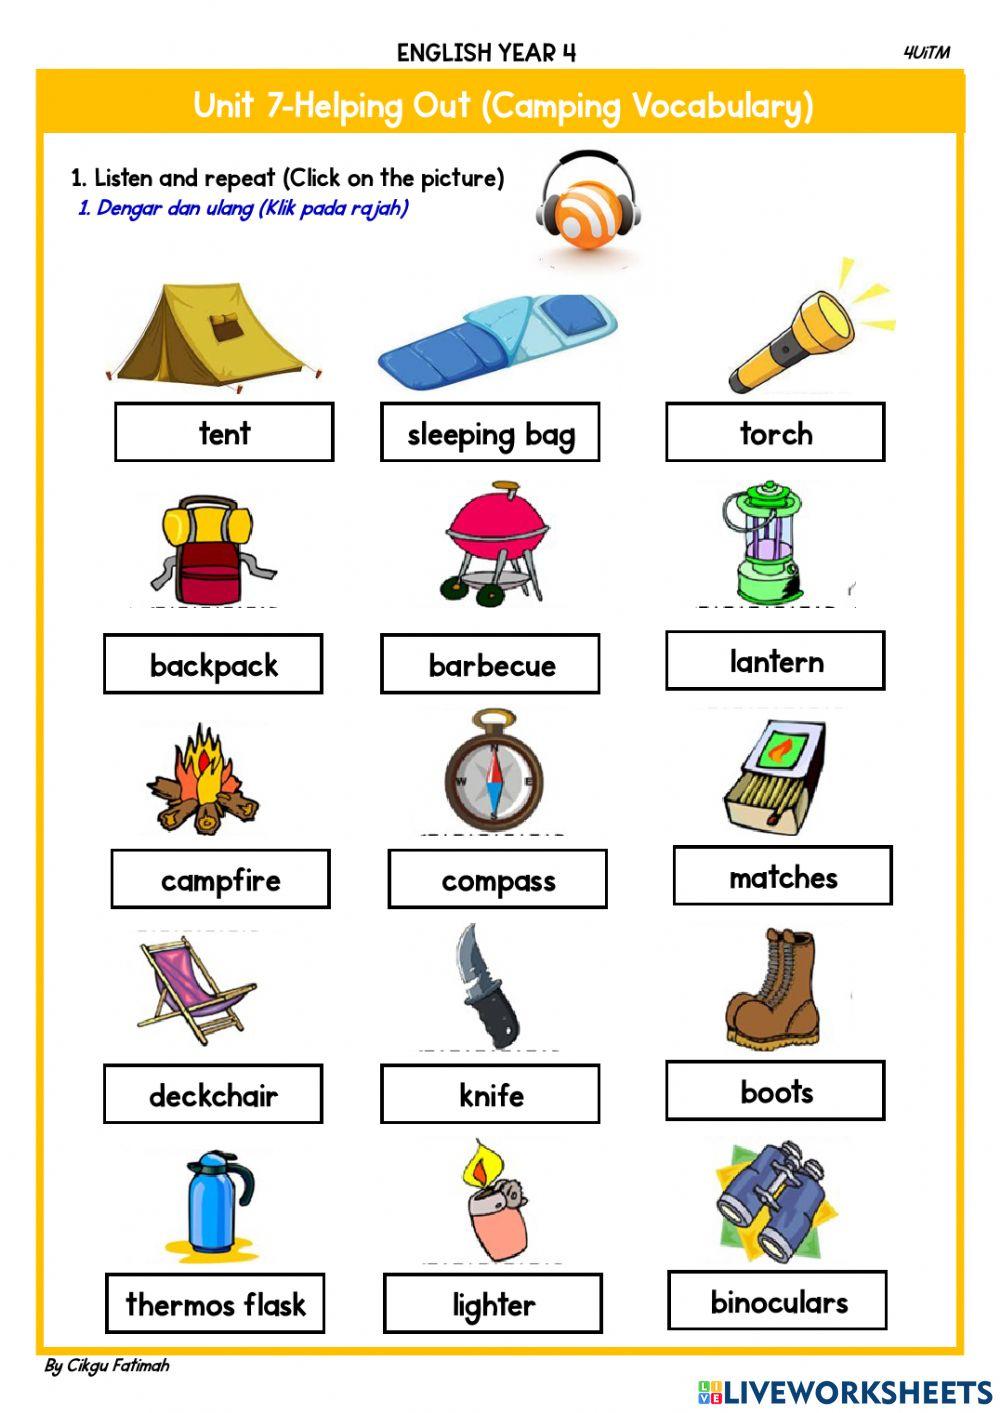 Unit 7 Helping Out -Camping Vocabulary